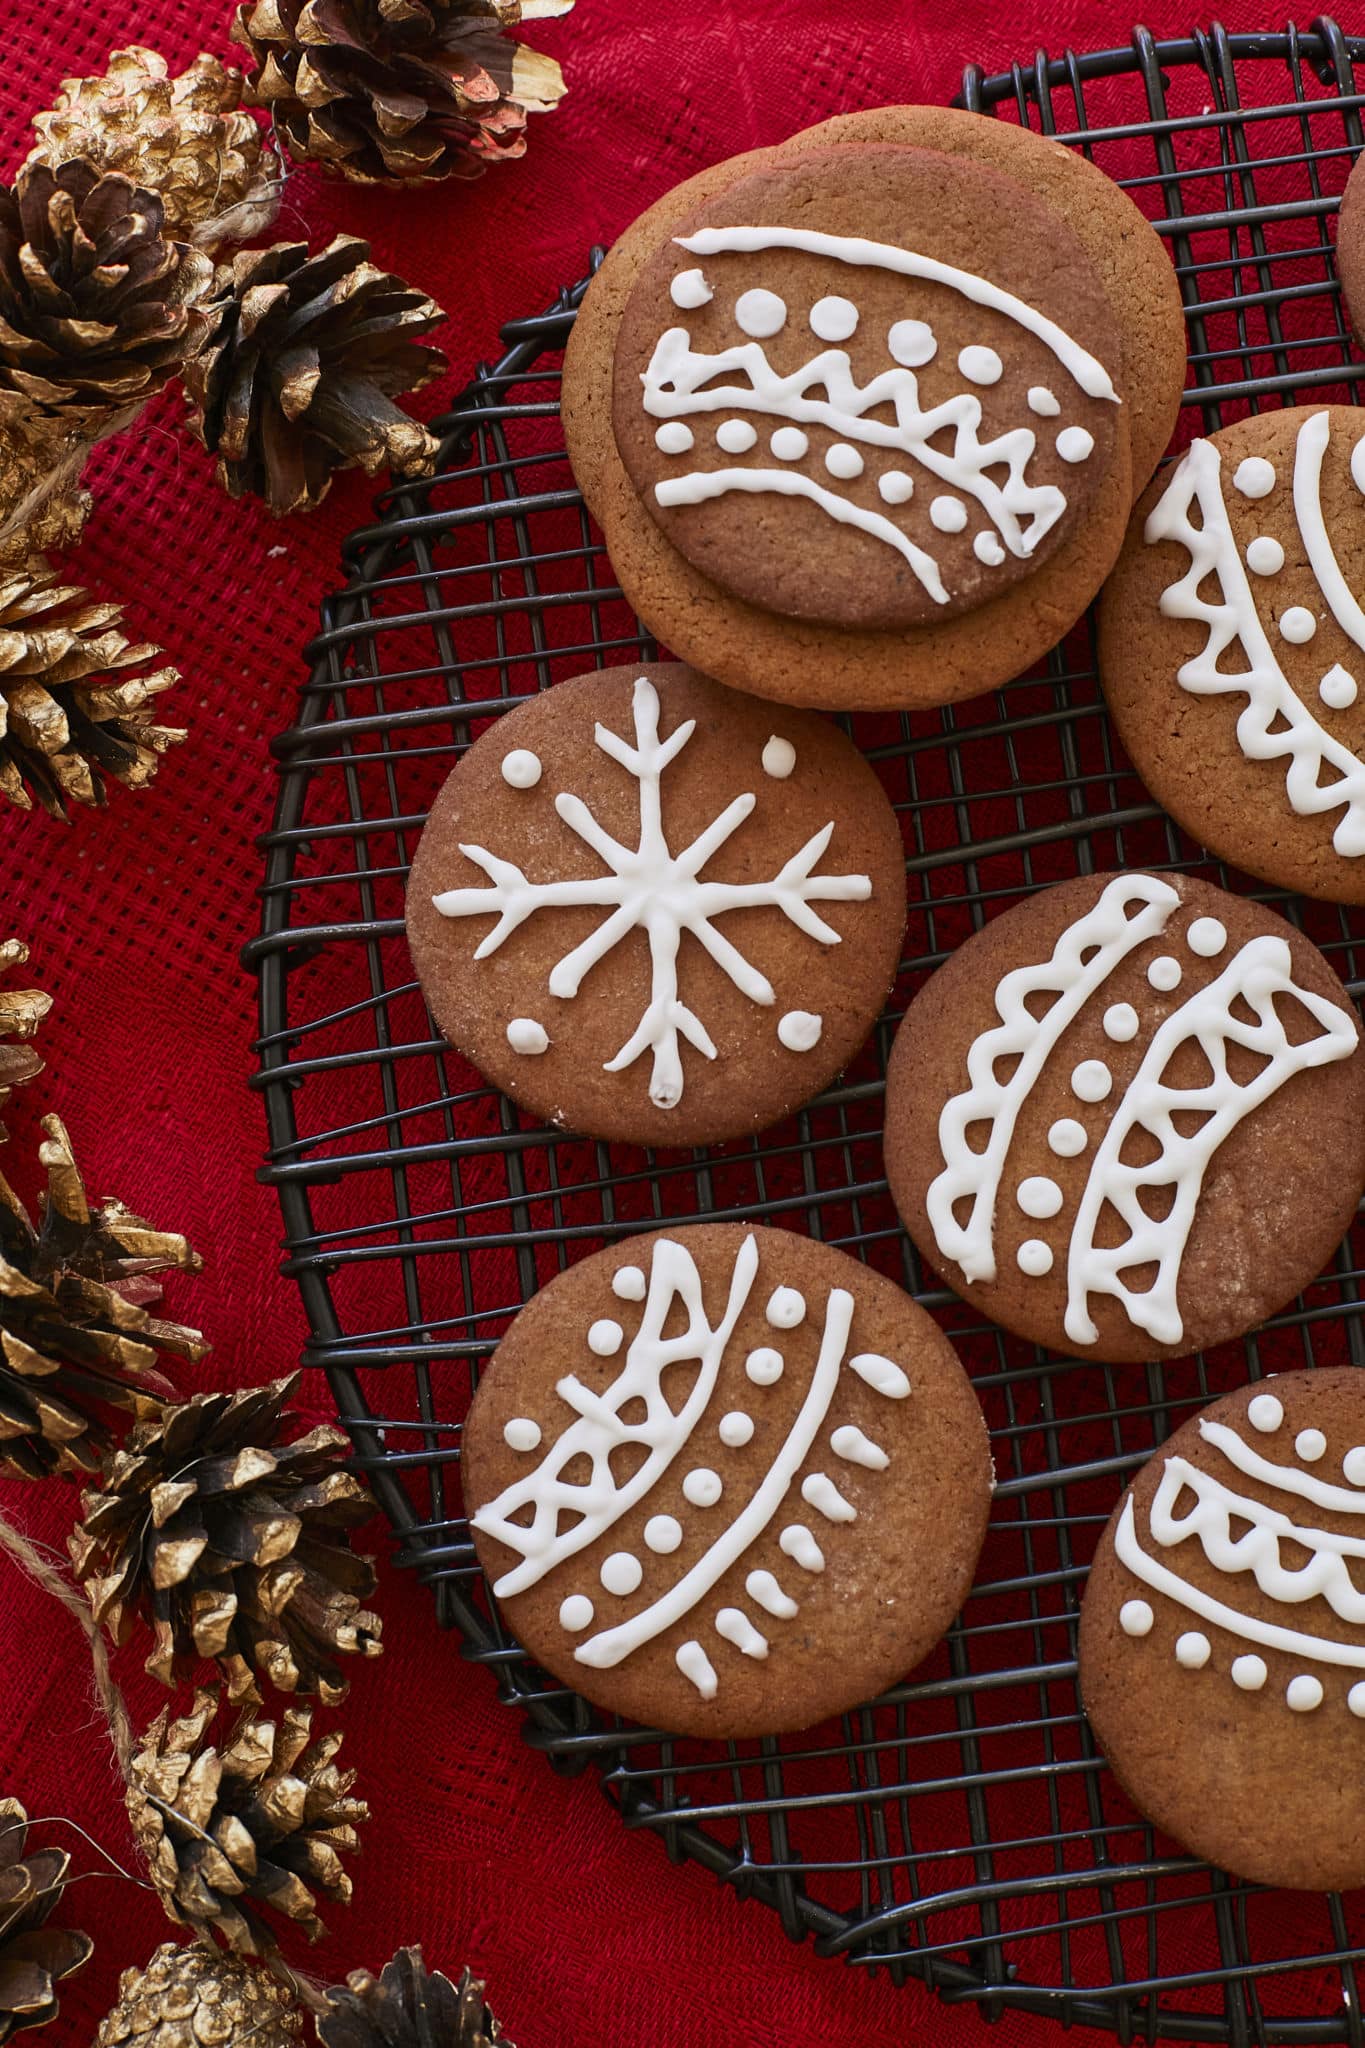 Snappy, crispy Pepparkakors are decorated with homemade royal icing for the holidays.